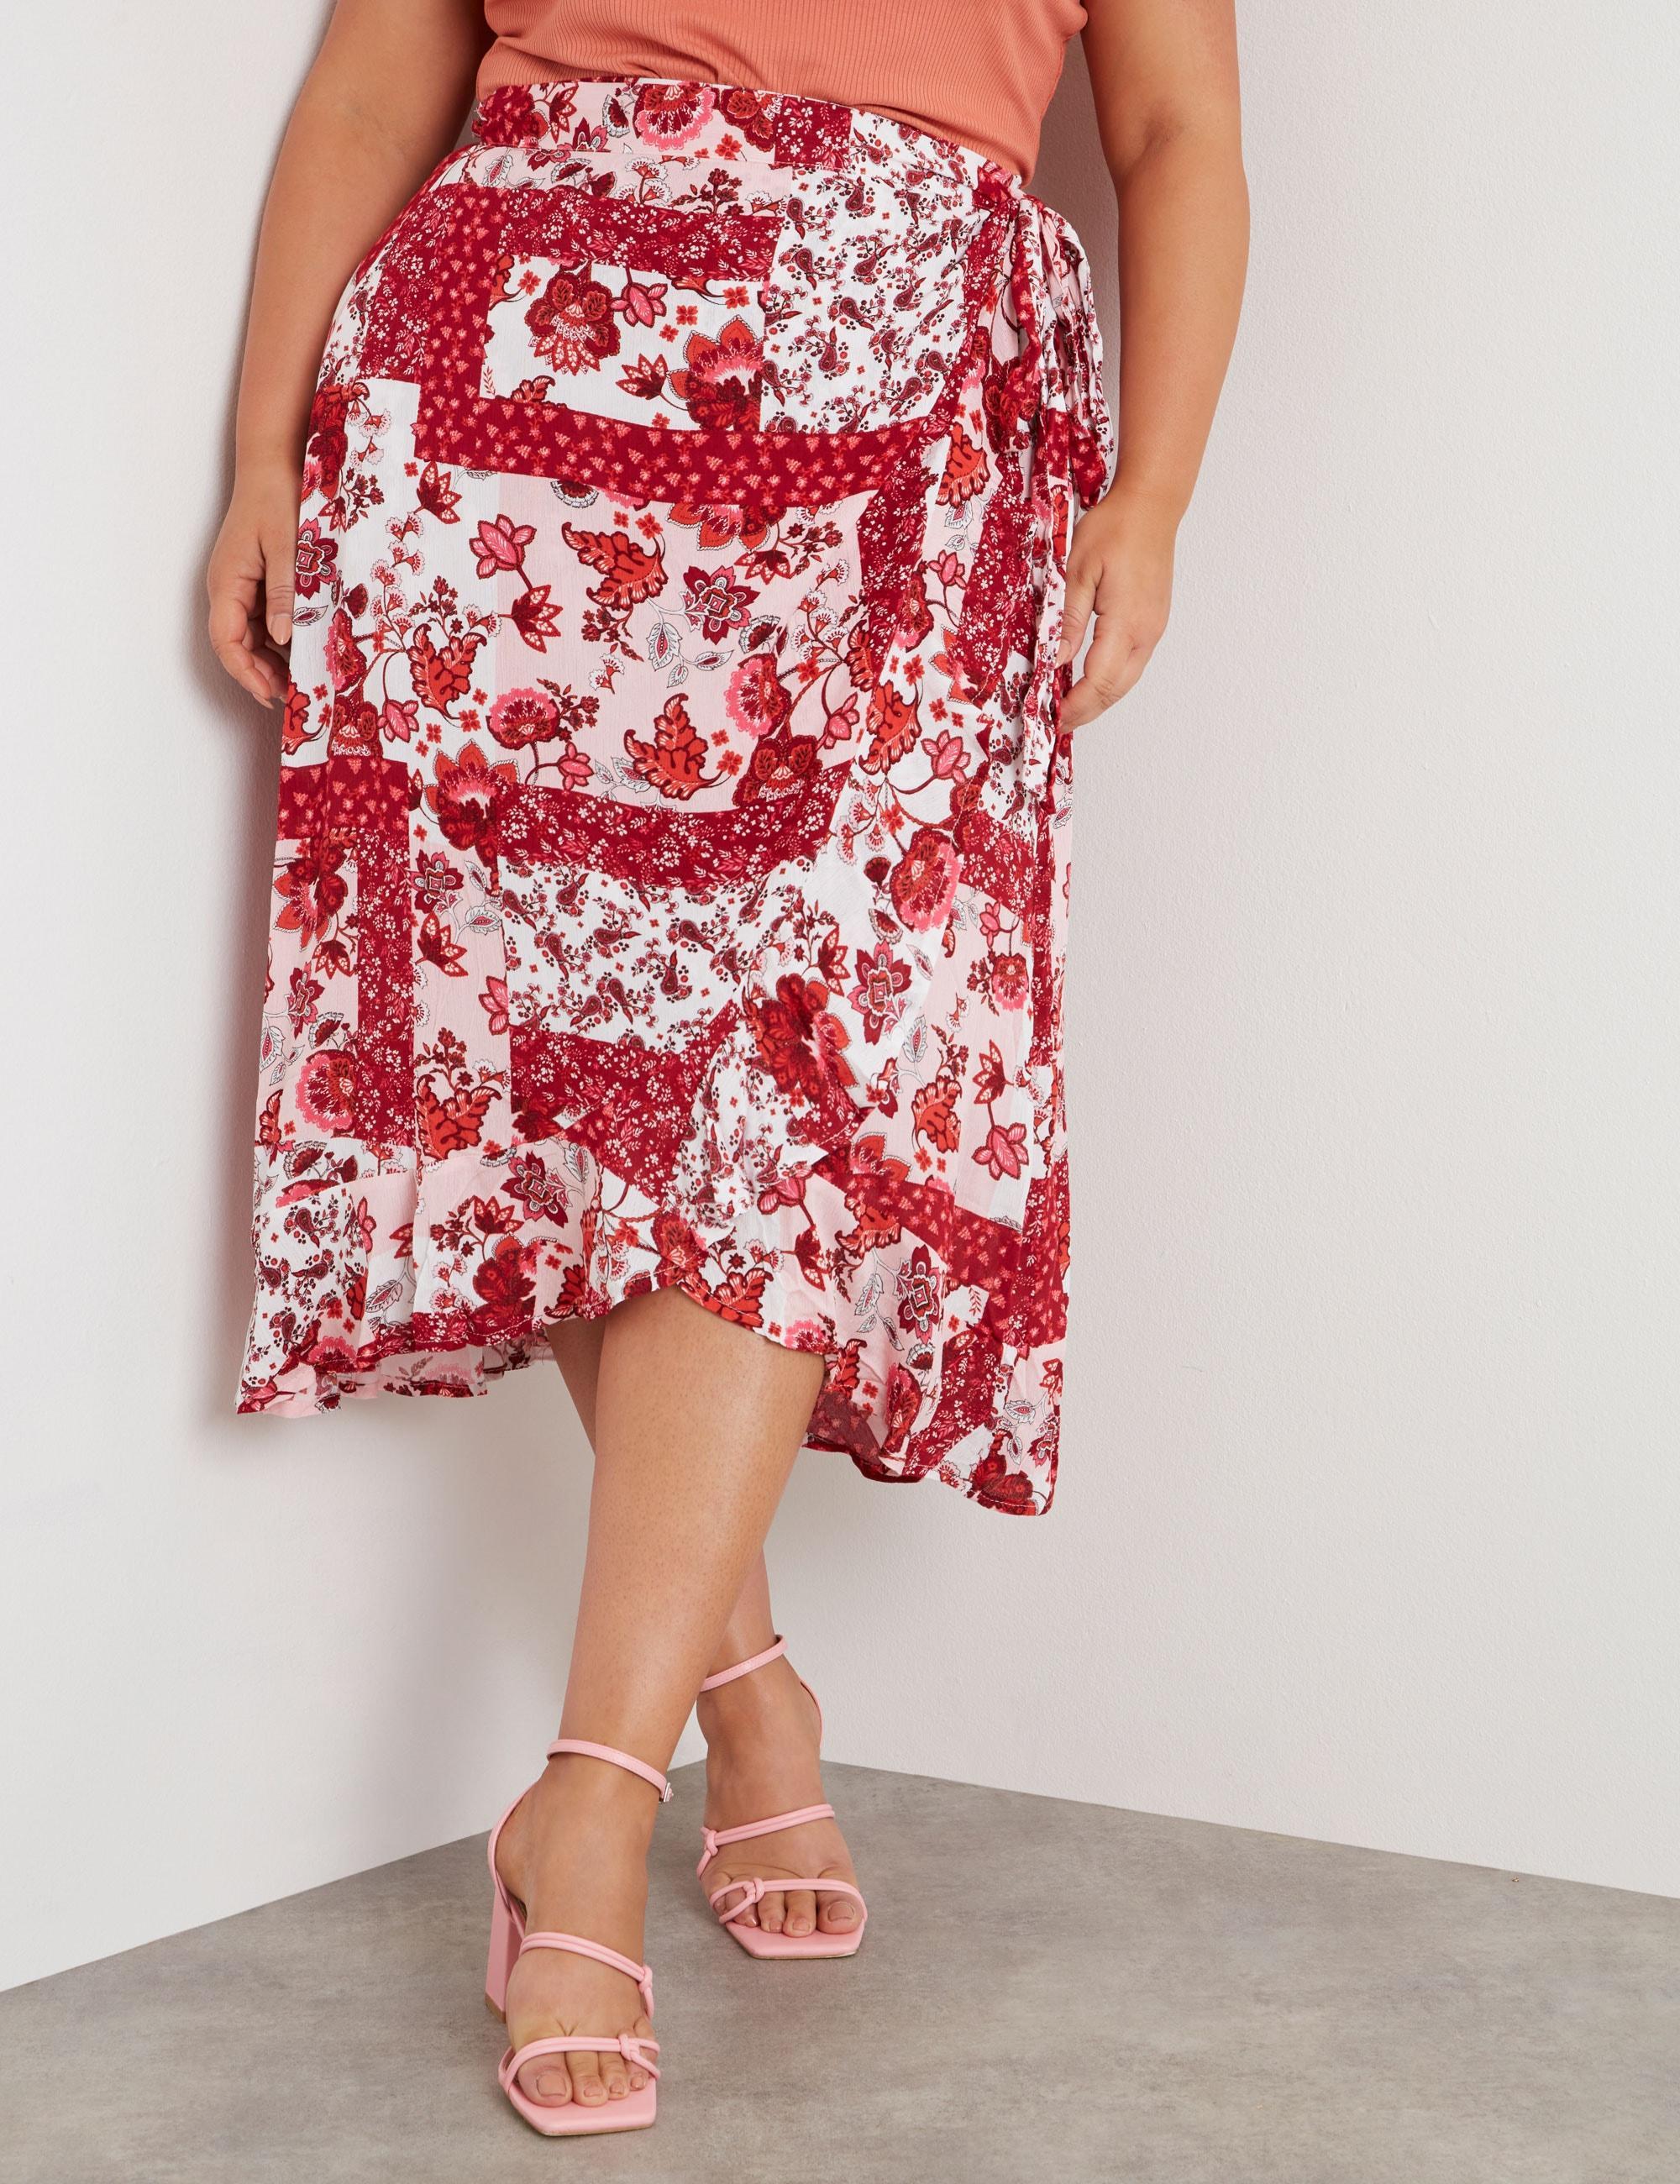 BeMe - Plus Size - Womens Skirts - Midi - Summer - Red - Floral - Work Clothes - Berry Patchwork - Oversized - Tie Waist Knee Length - Office Fashion